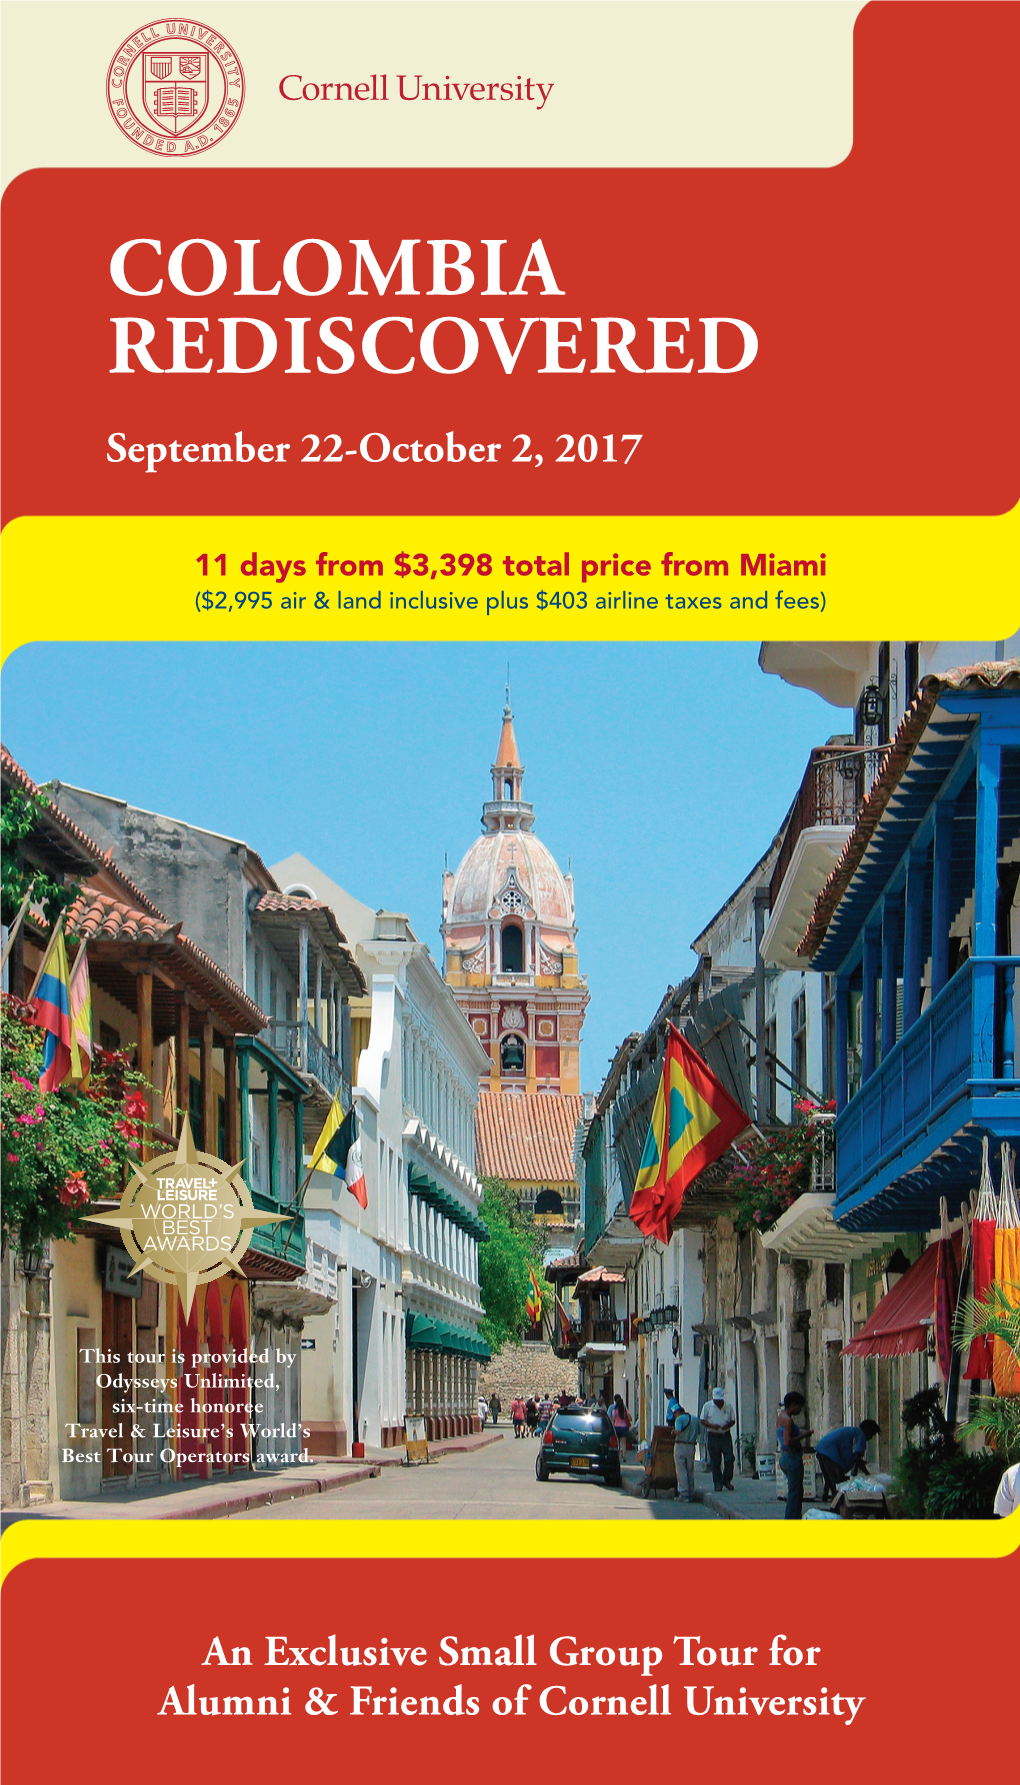 COLOMBIA REDISCOVERED September 22-October 2, 2017